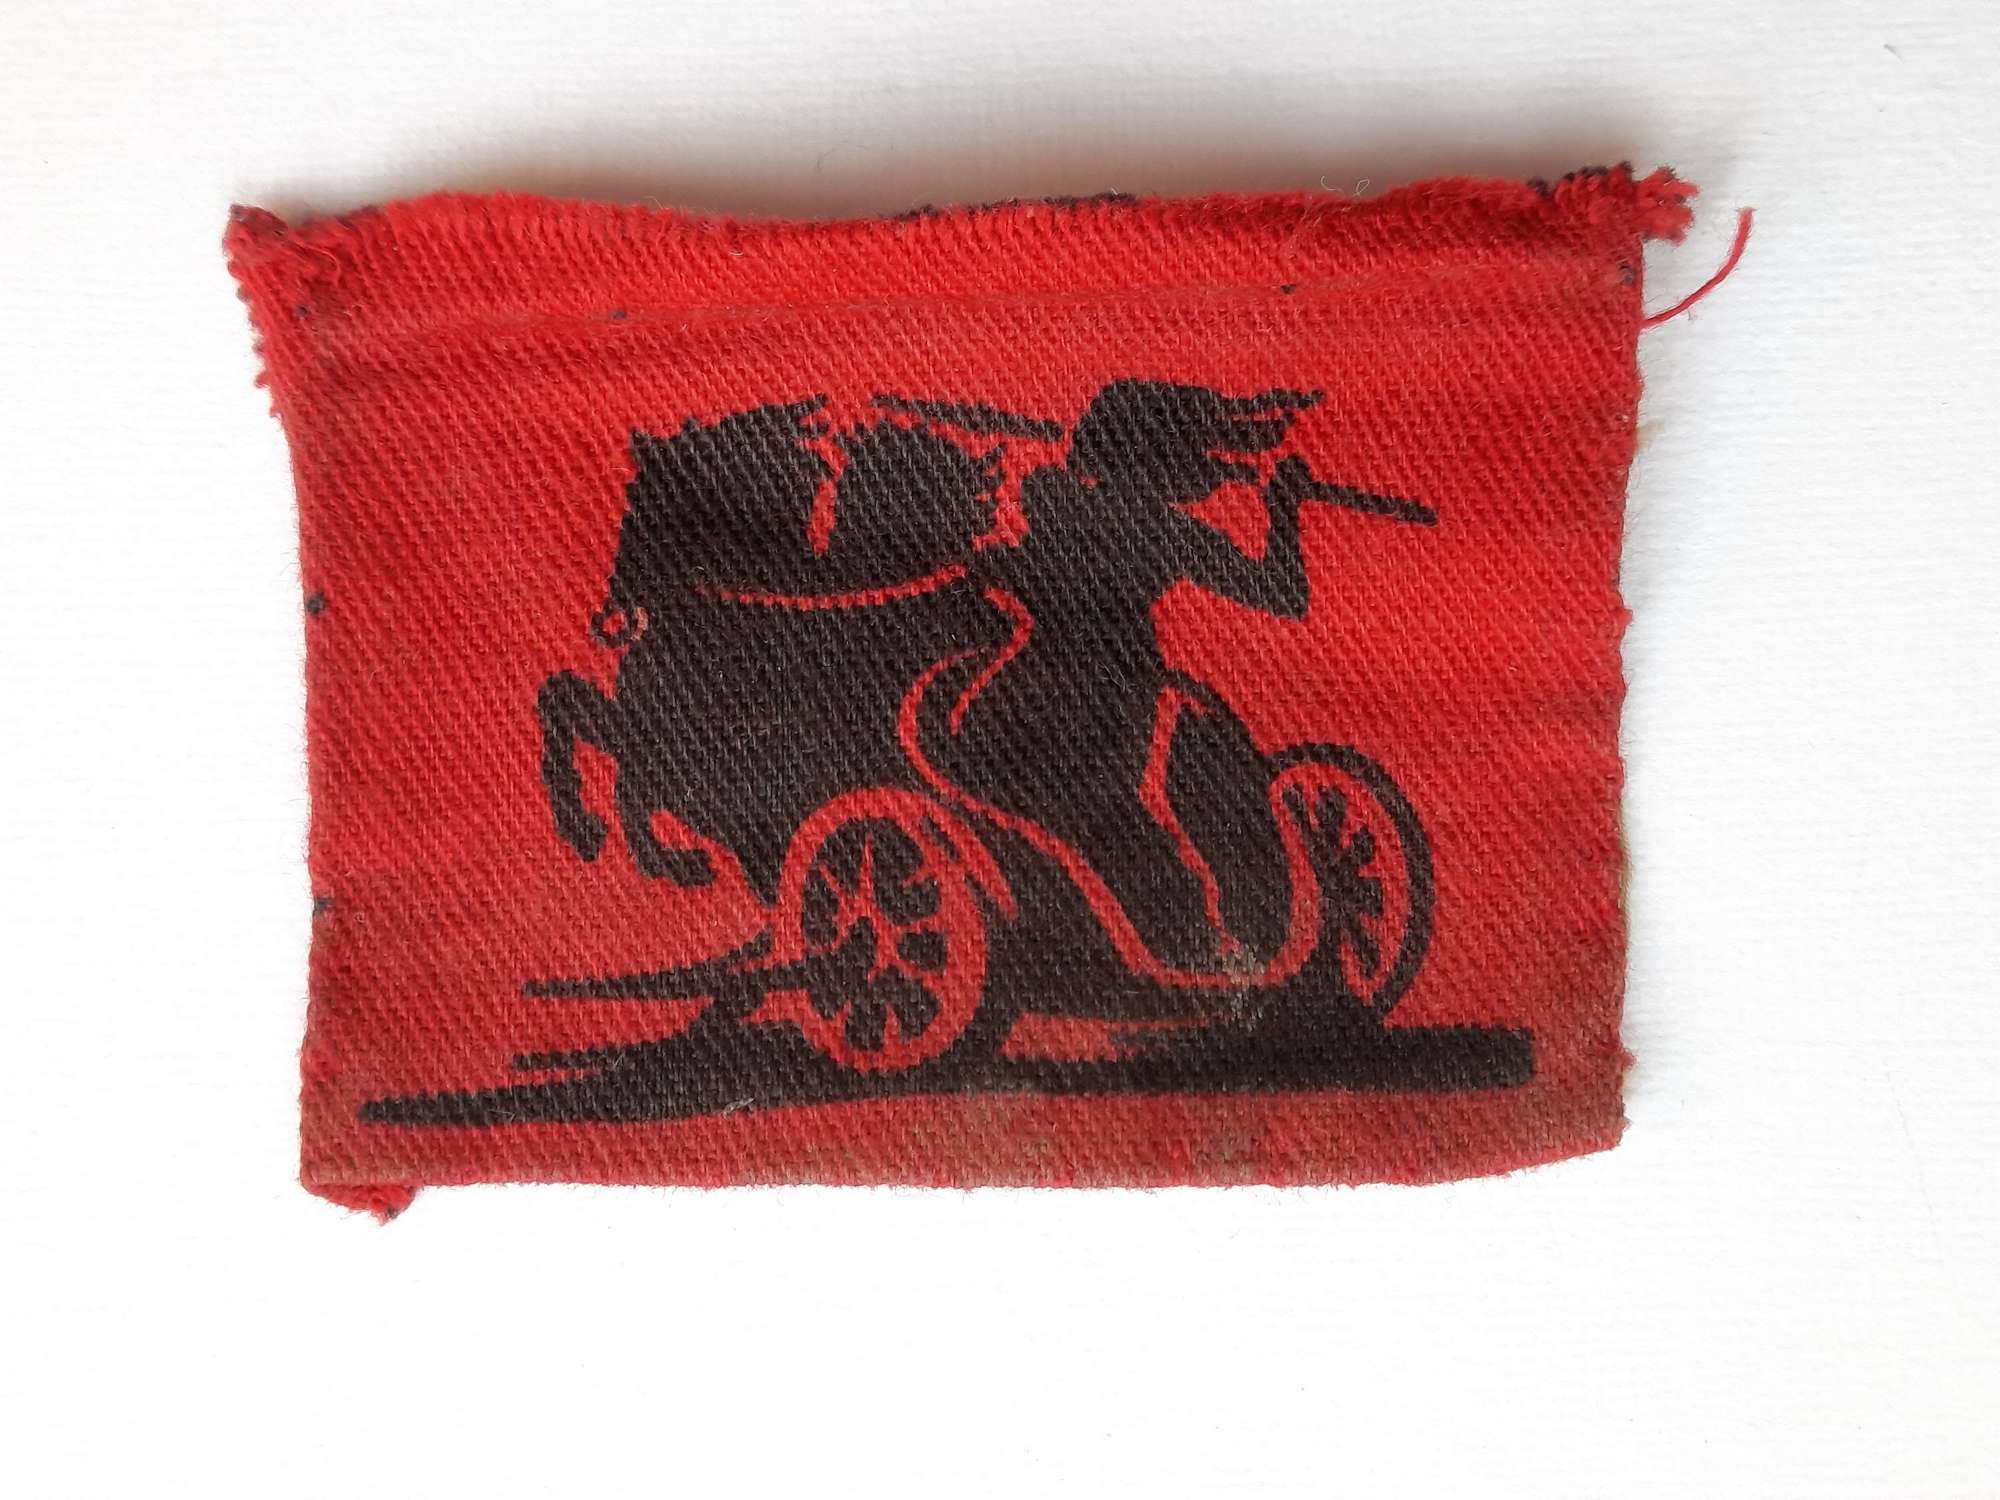 161st Independent Infantry Brigade Patch